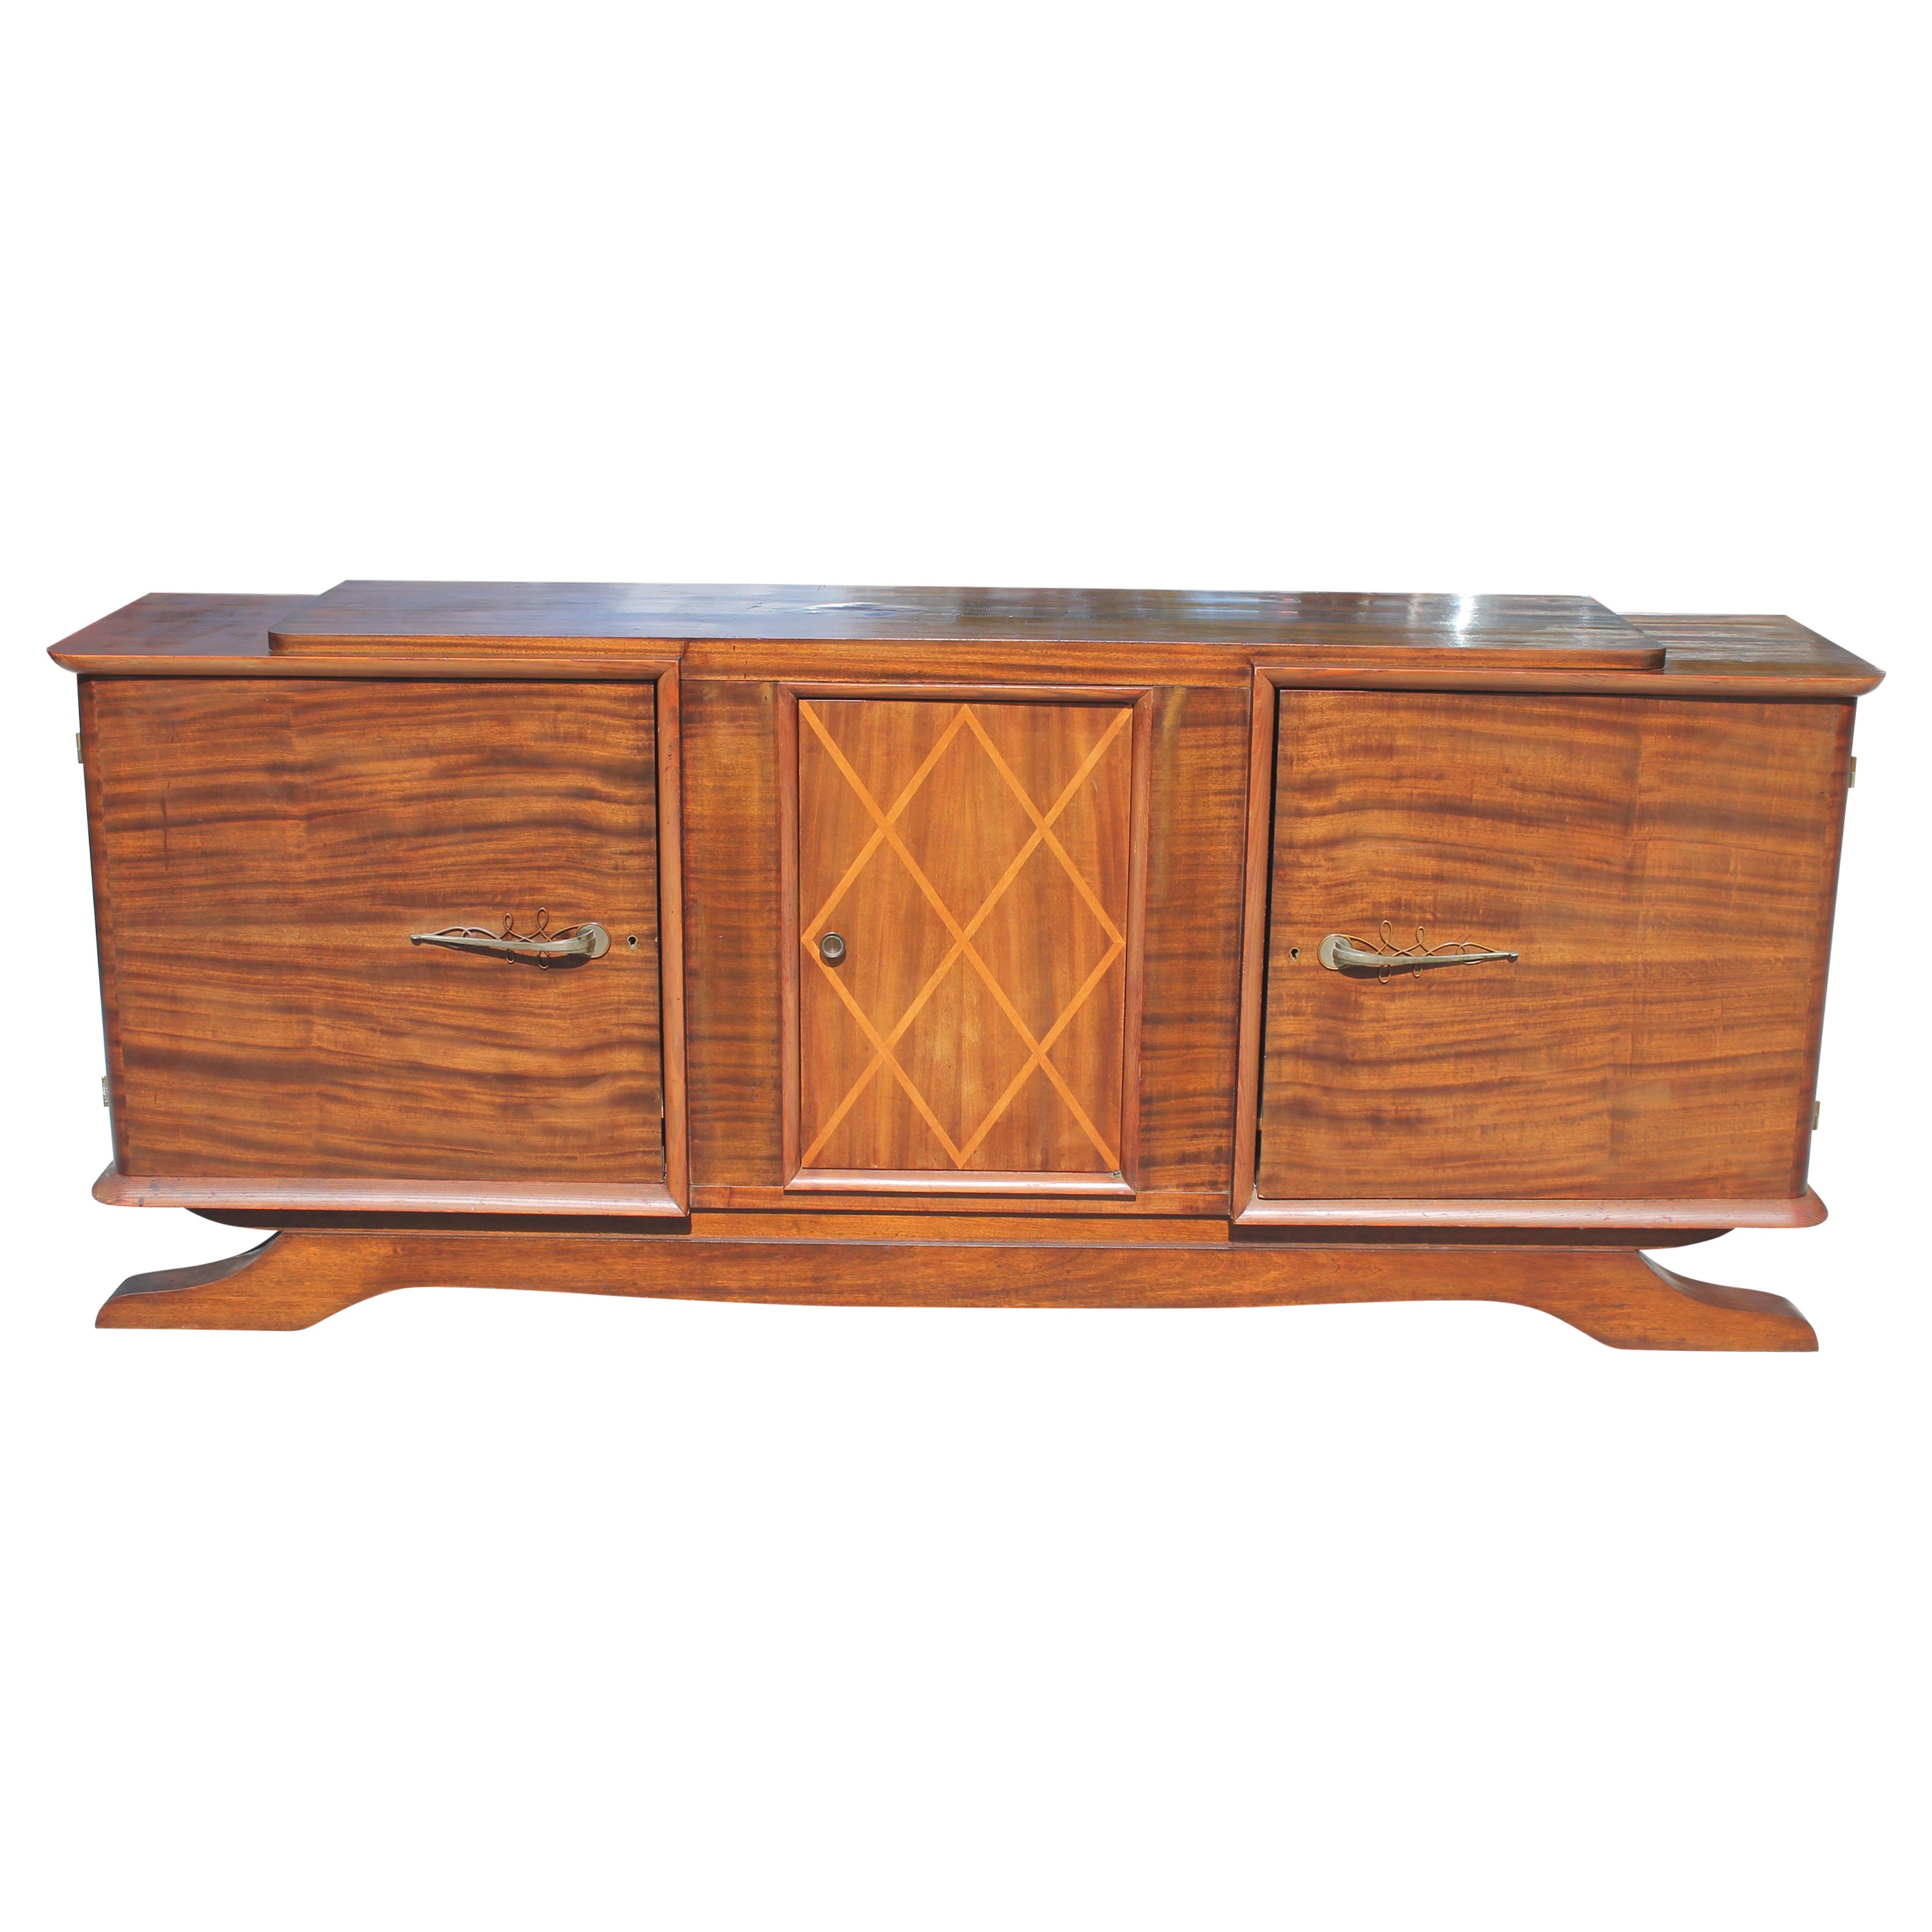 1930's French Art Deco Classic Exotic Walnut Buffet/ Sideboard/ Credenza